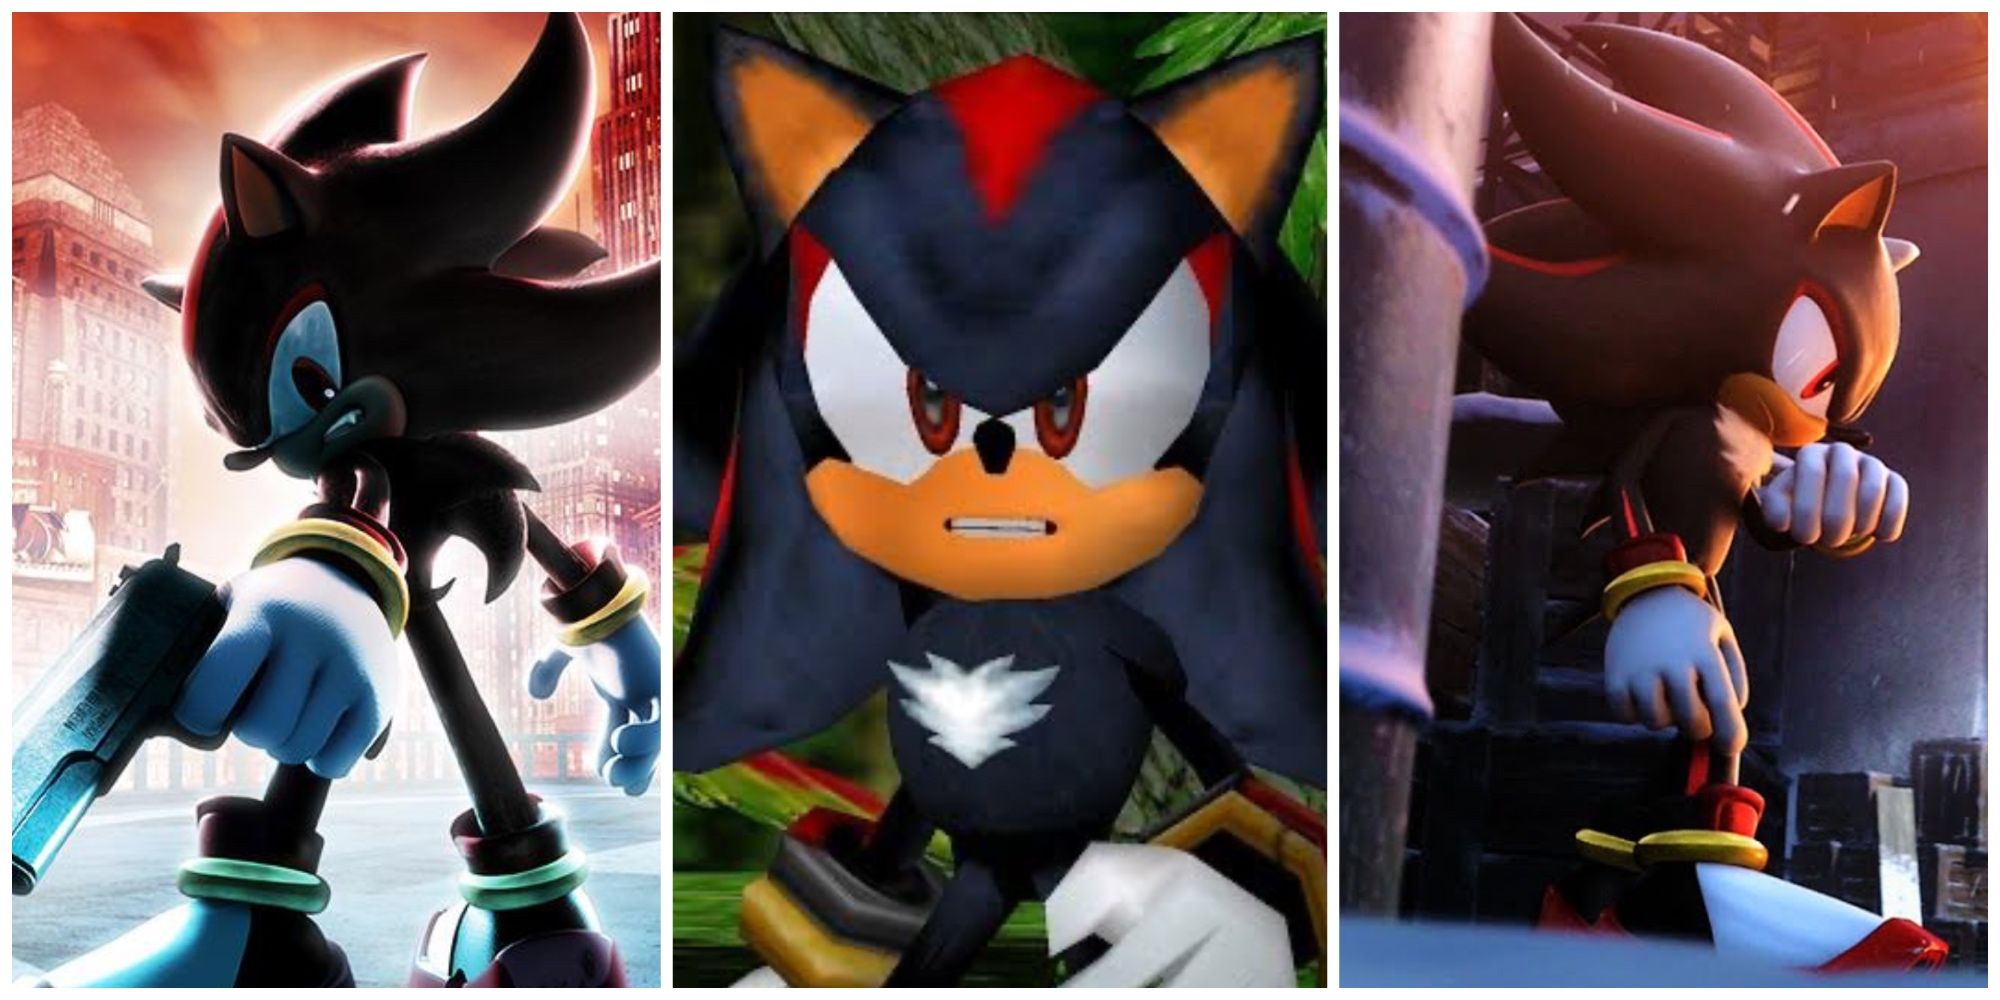 Shadow from his own game, shadow the hedgehog, Sonic adventure 2 and sonic '06